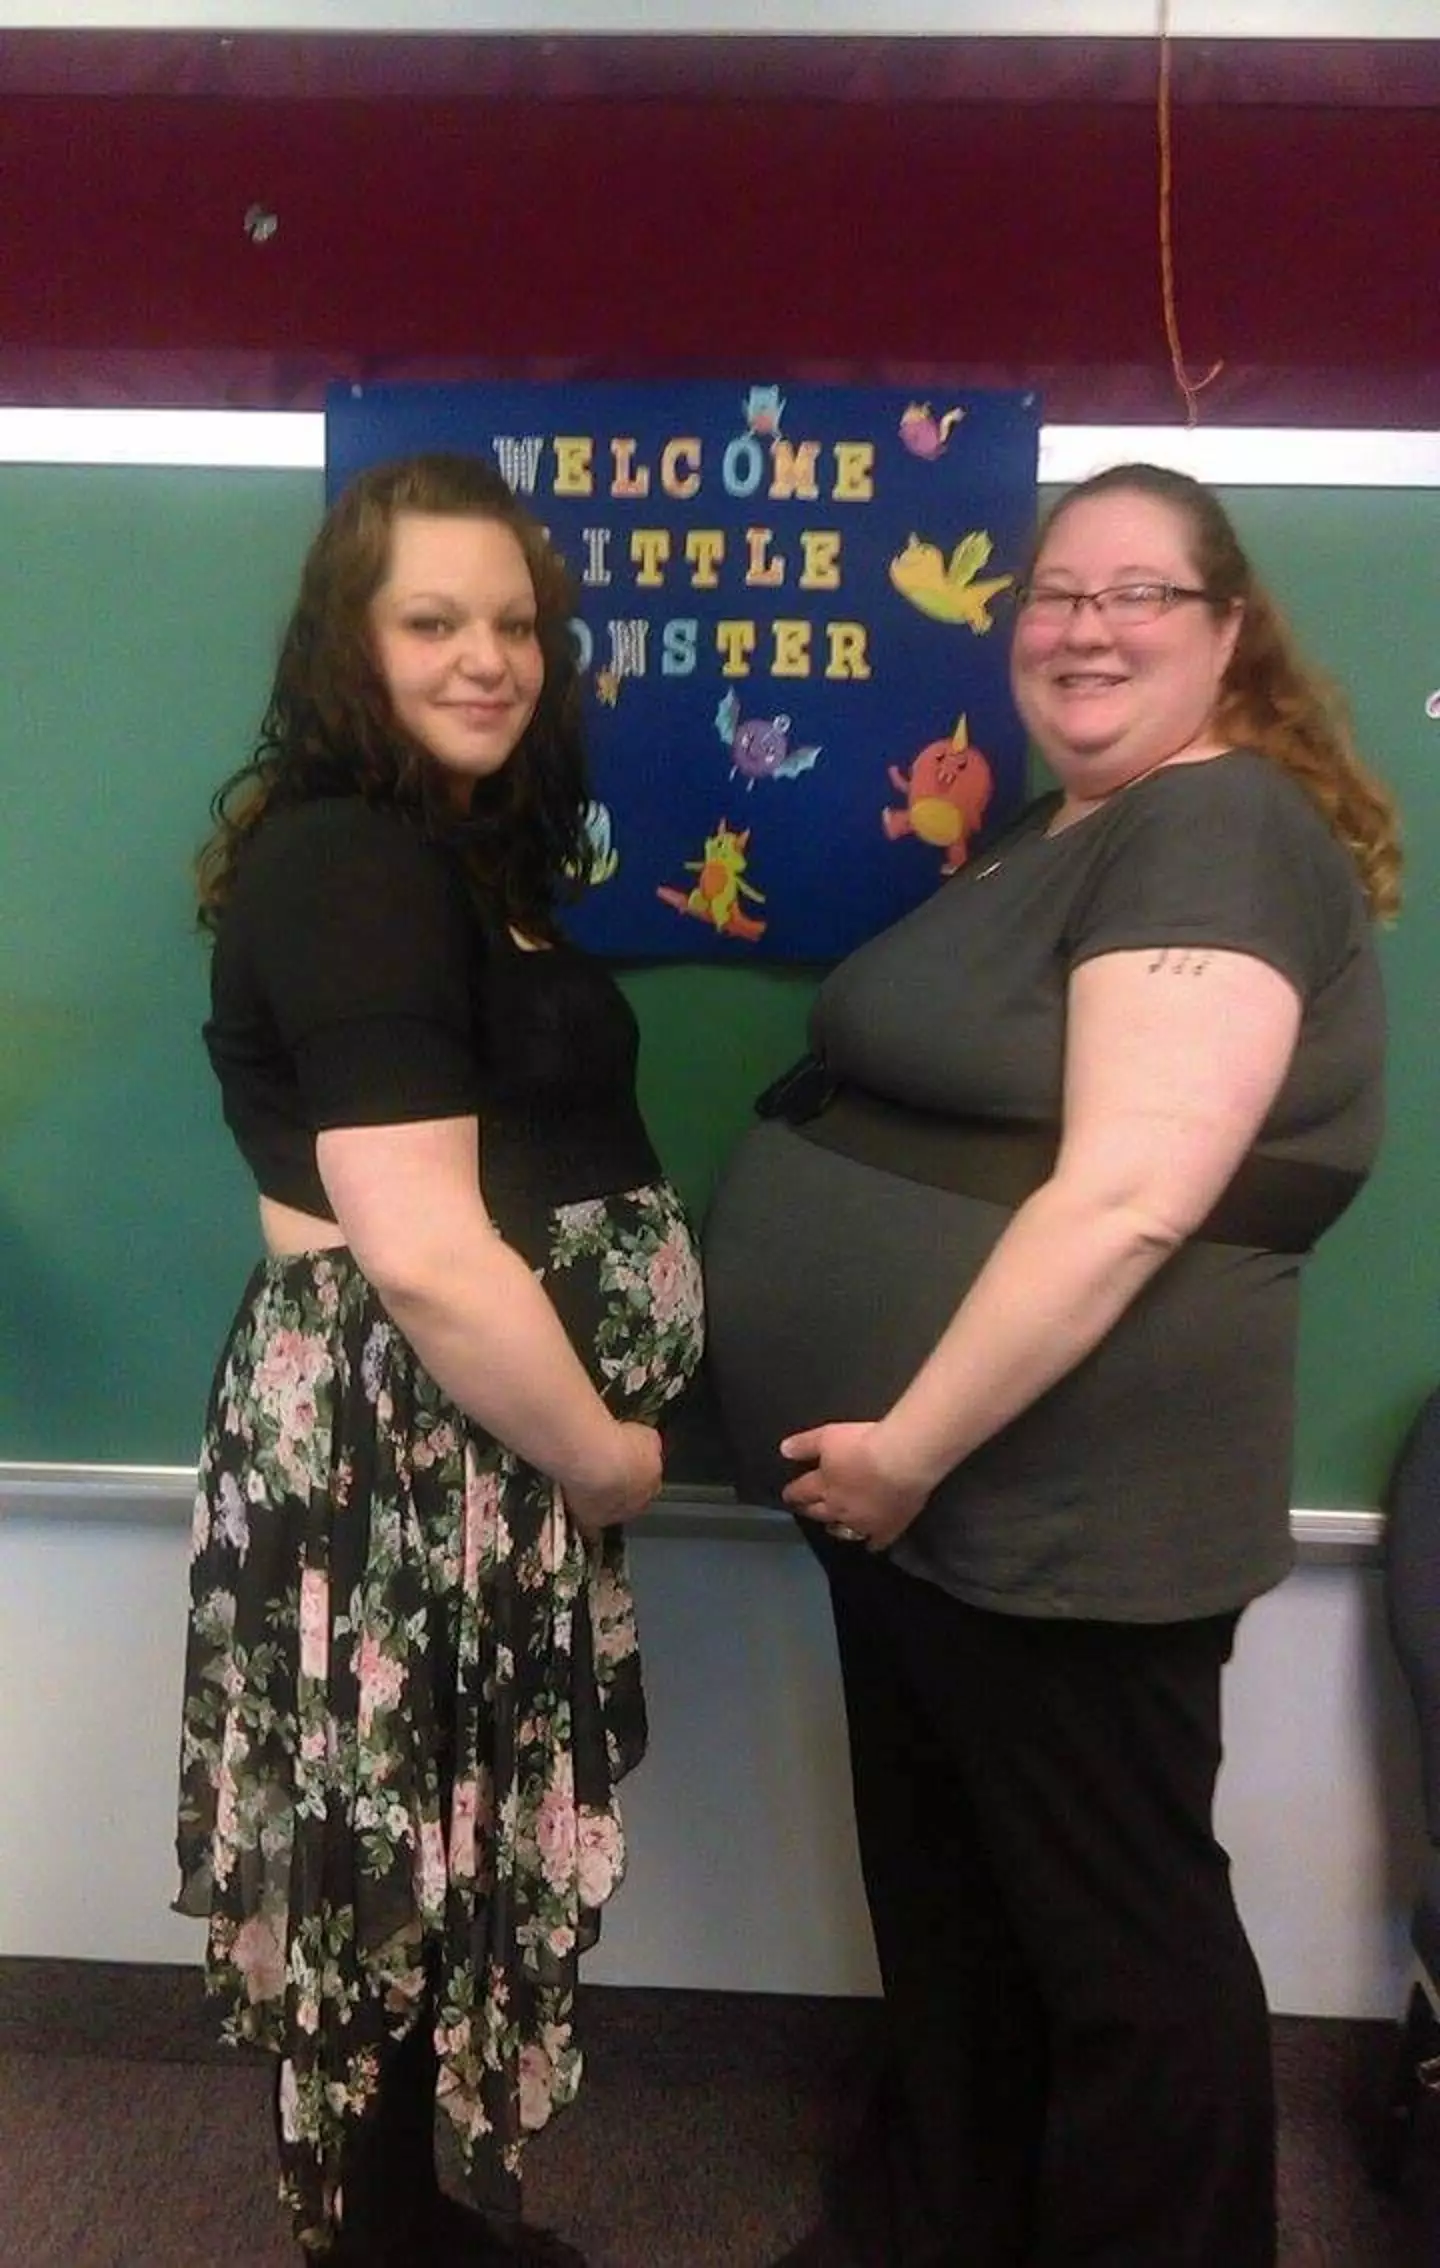 The pair met while pregnant in 2016.